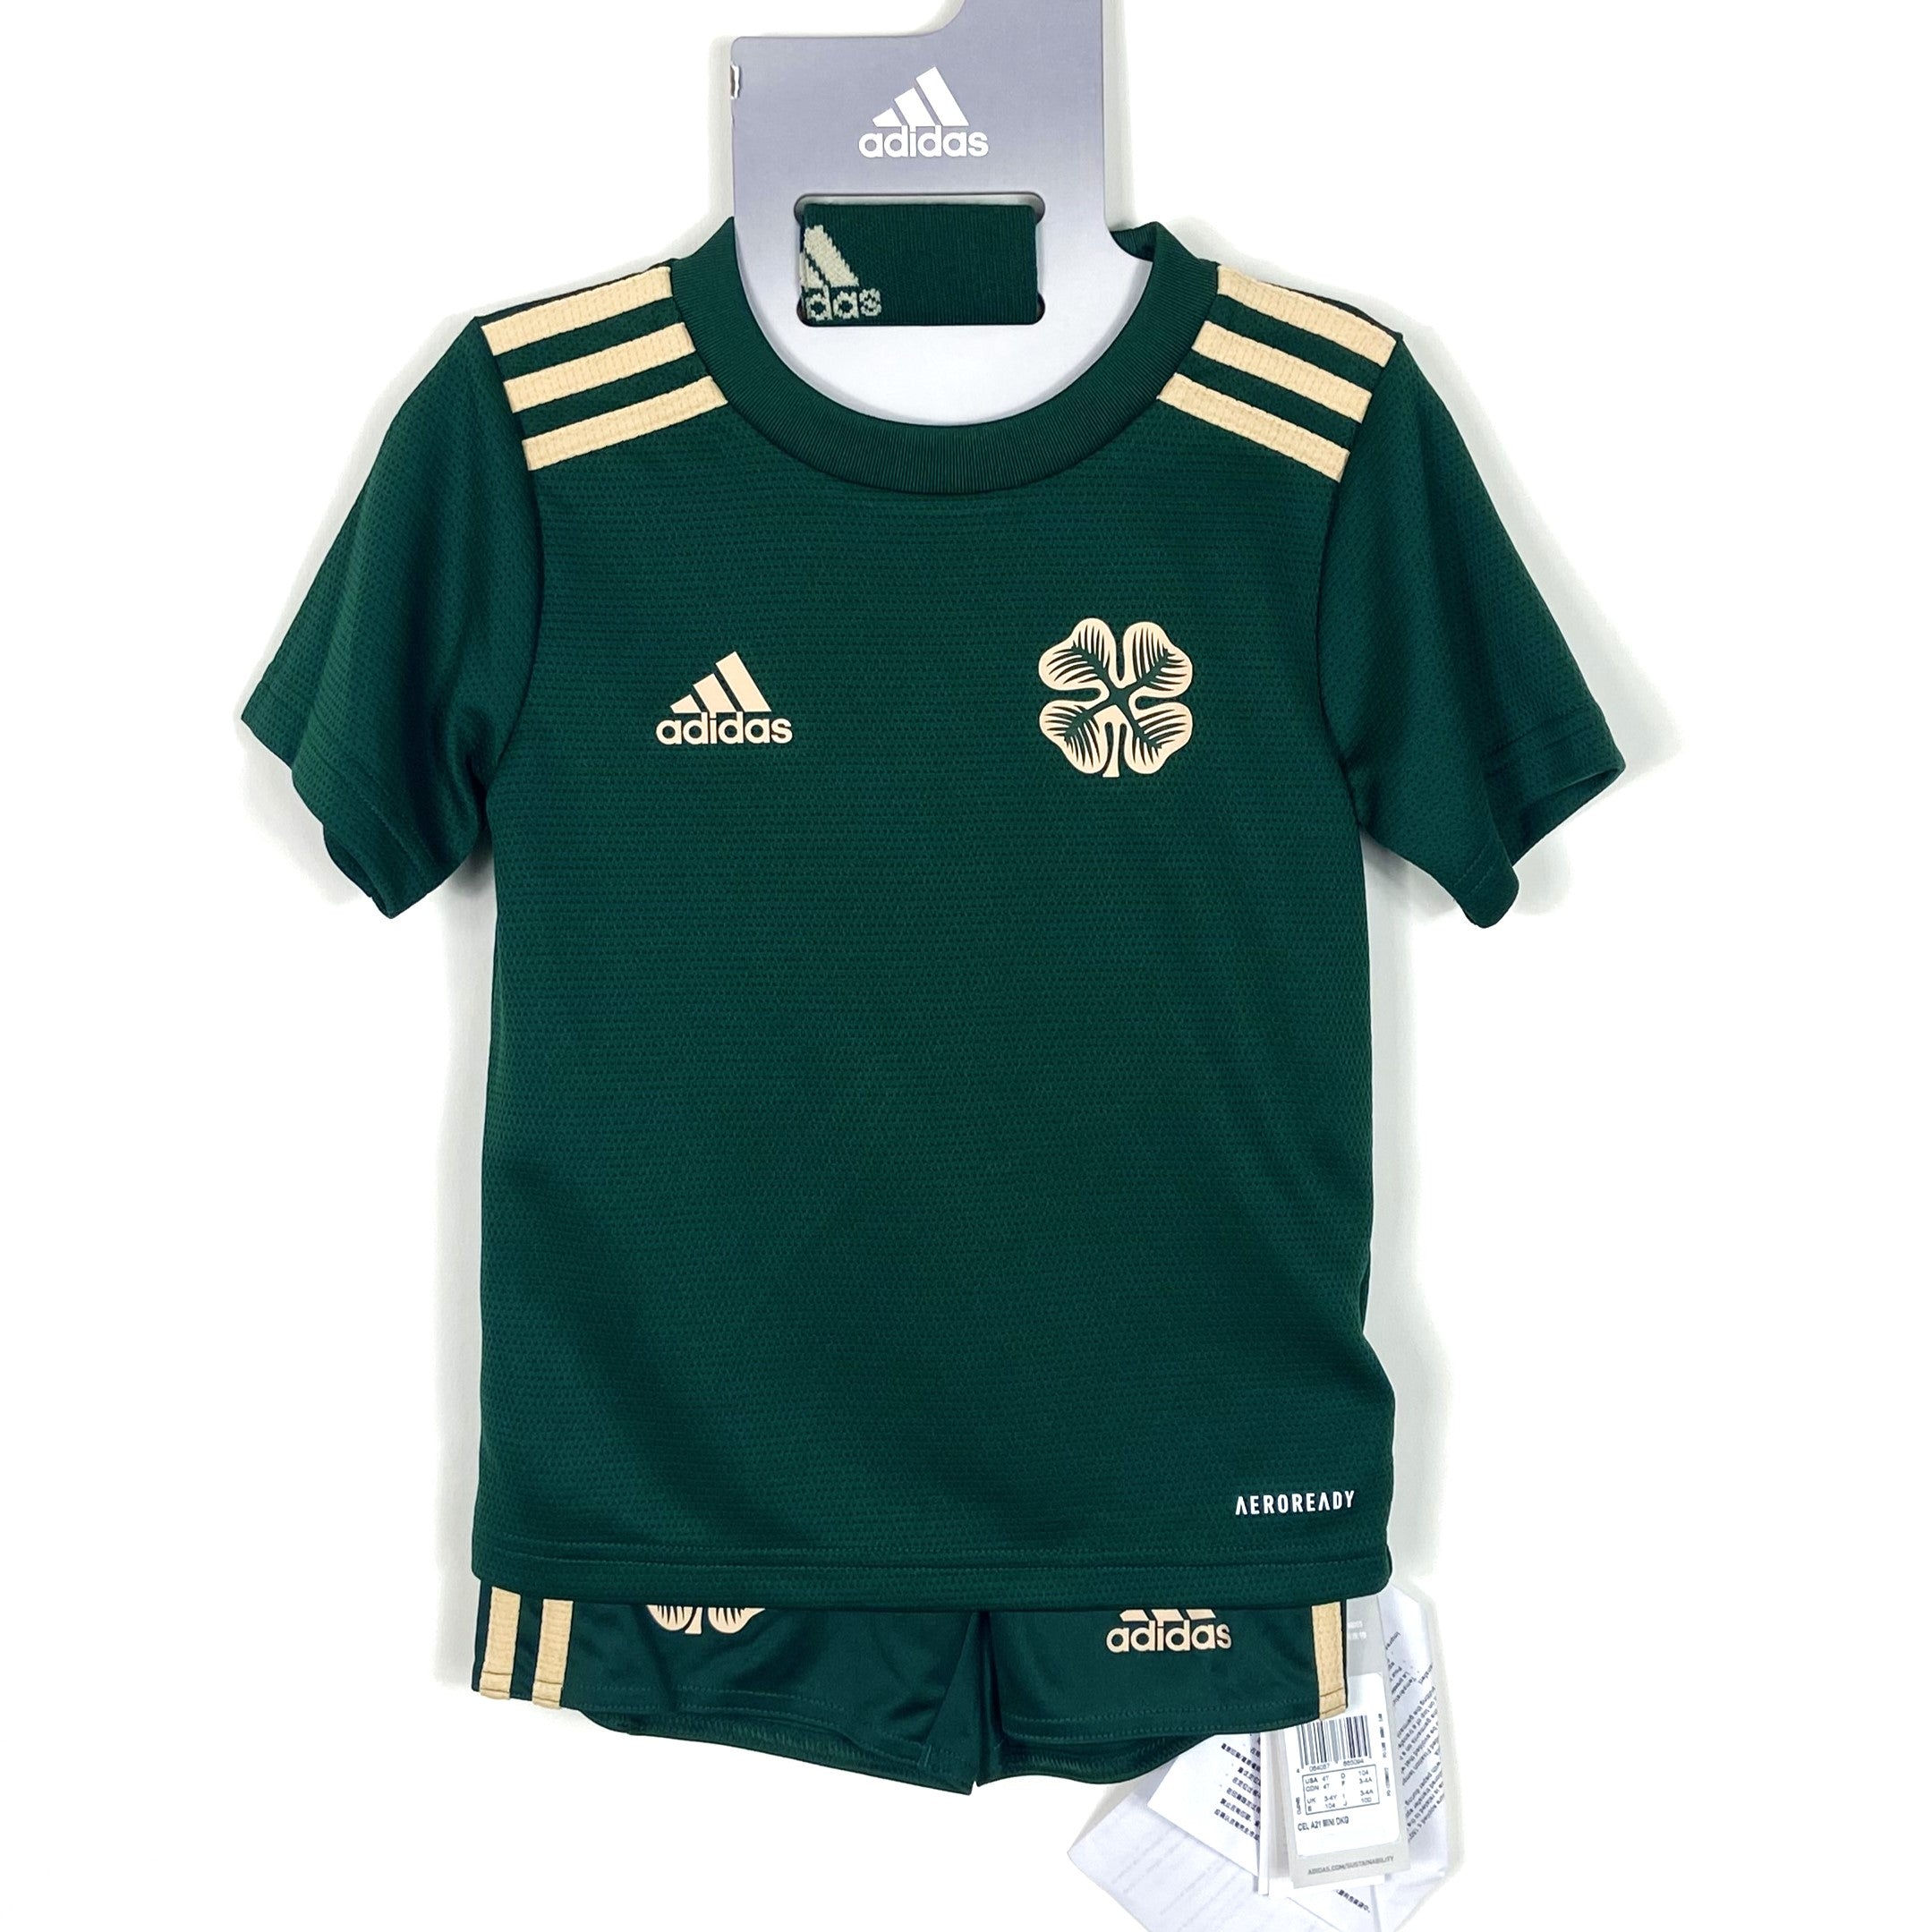 New Adidas international kits could send Celtic jersey clues for 21-22